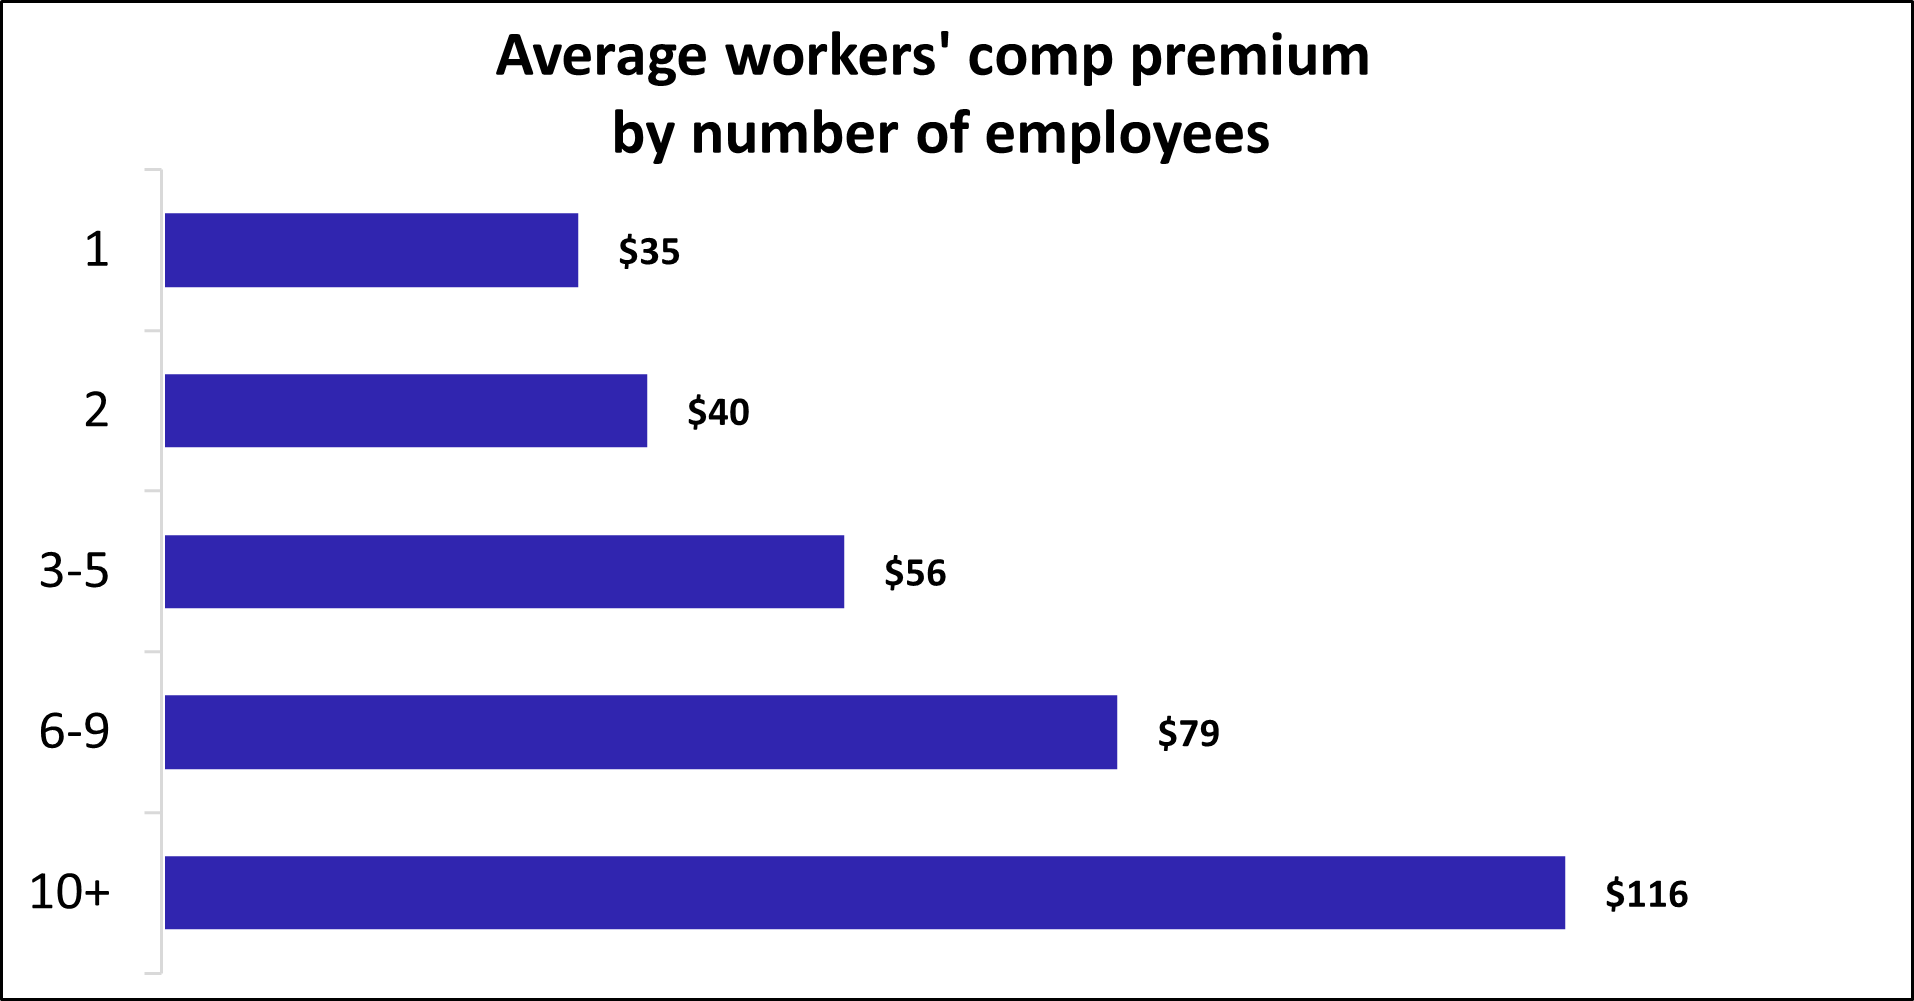 Average workers’ comp premium by number of employees.